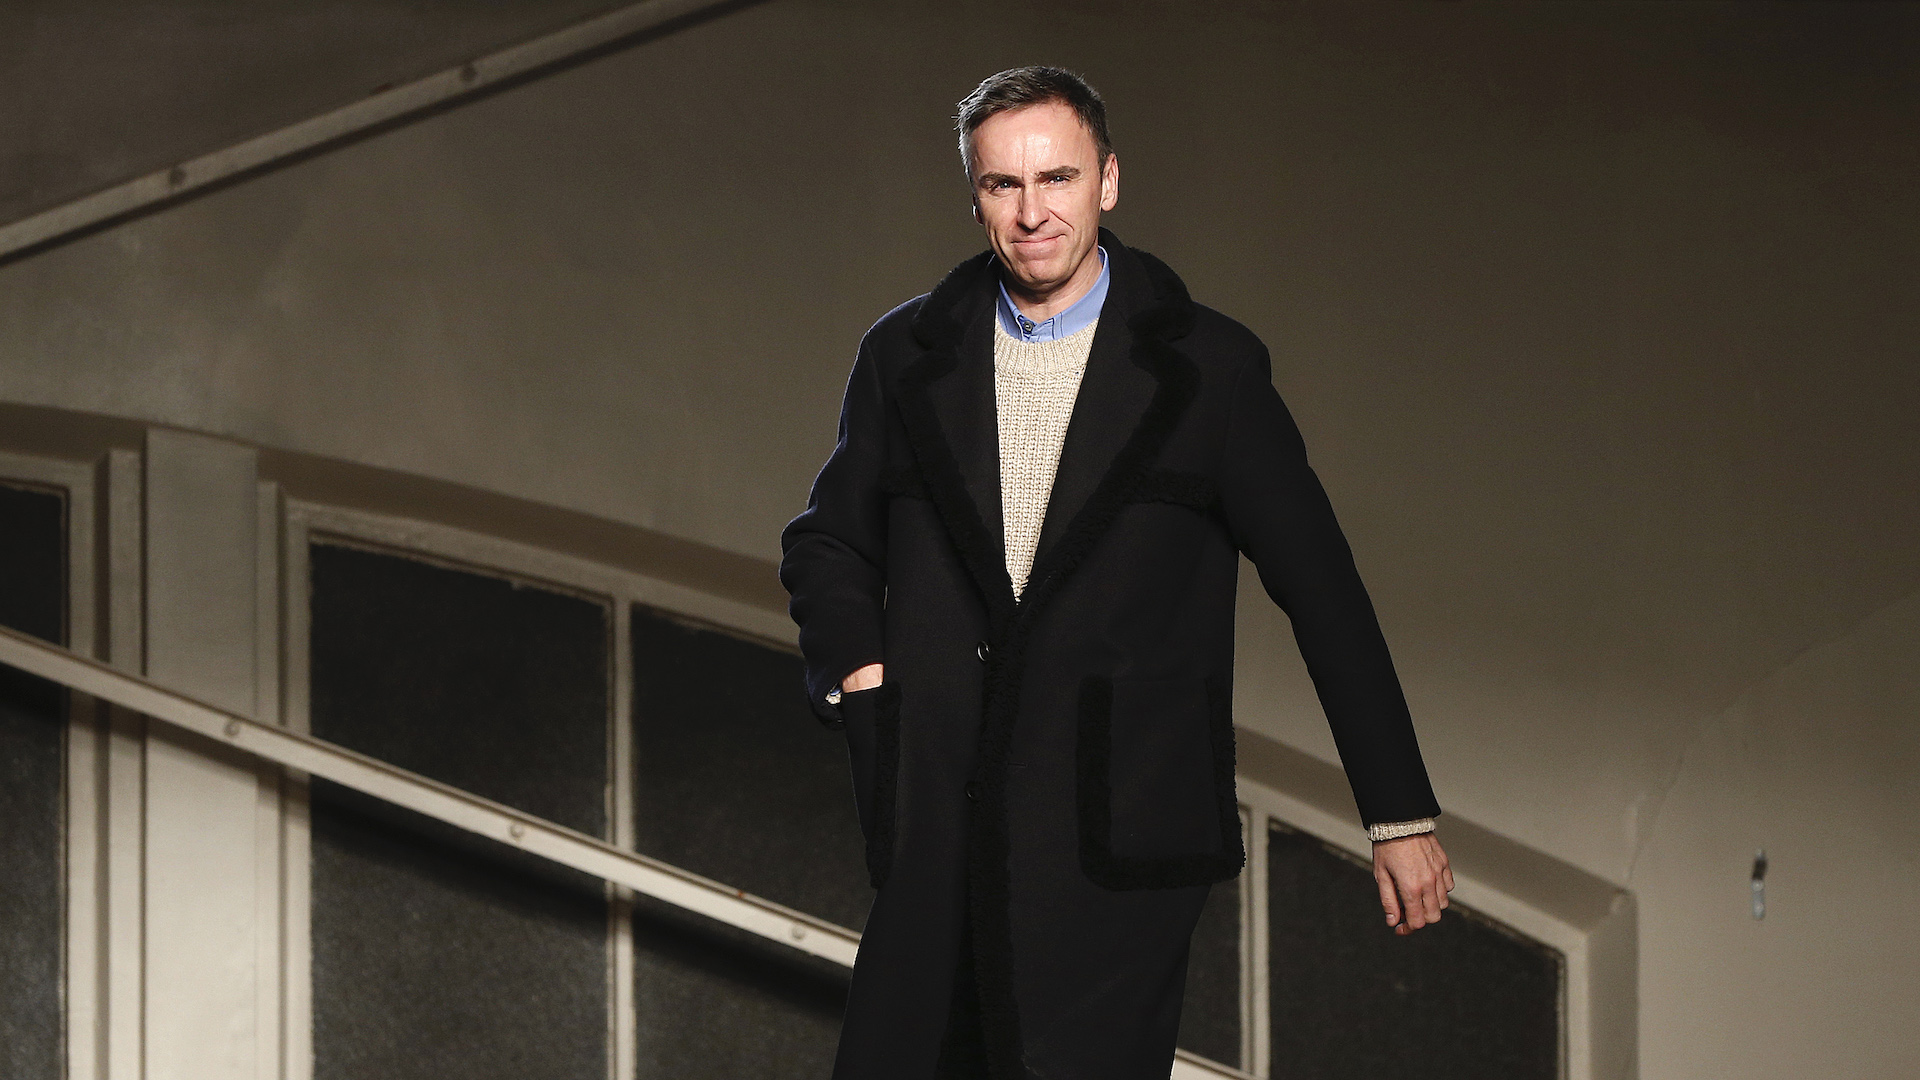 Raf Simons: Everything You Need to Know About the Fashion Designer